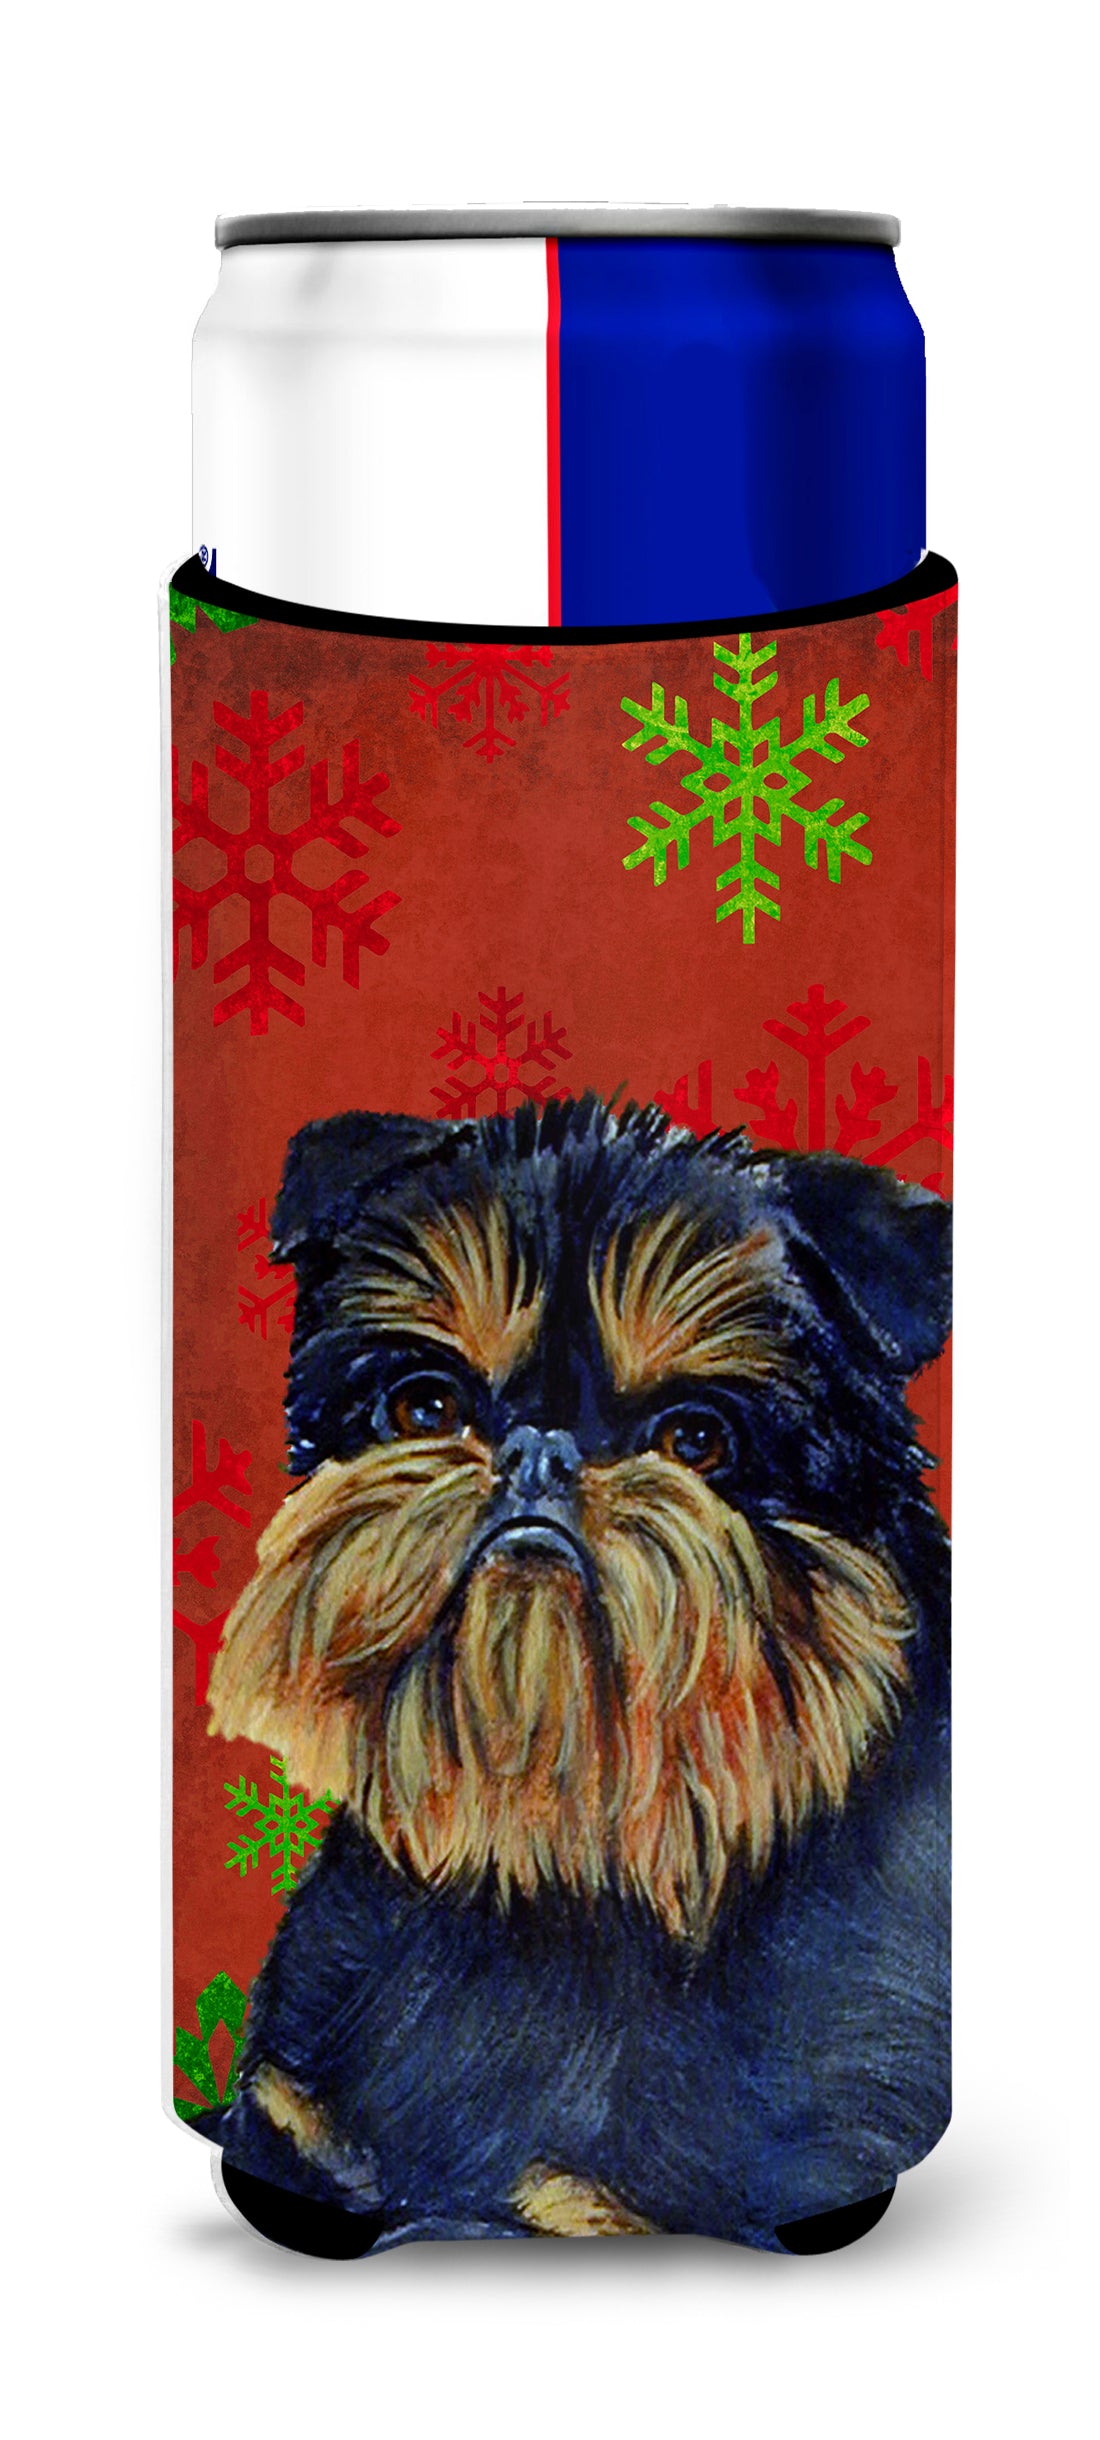 Brussels Griffon Red and Green Snowflakes Holiday Christmas Ultra Beverage Insulators for slim cans LH9343MUK